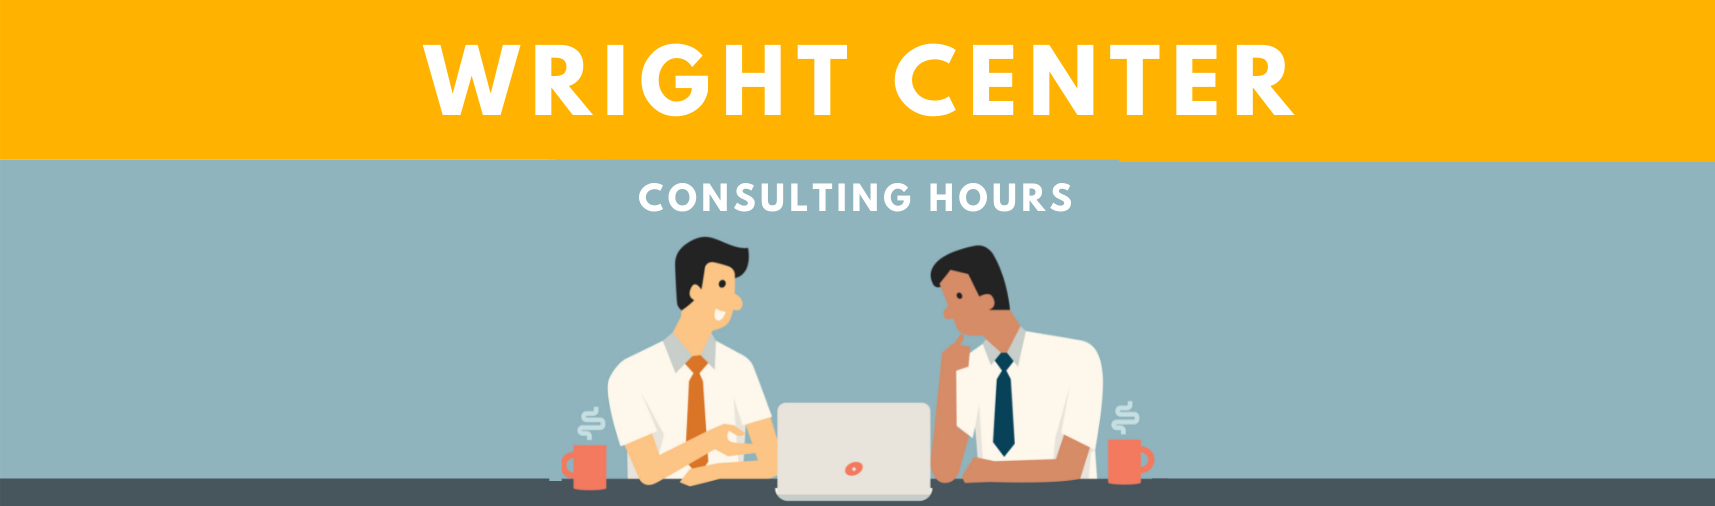 consulting hours image